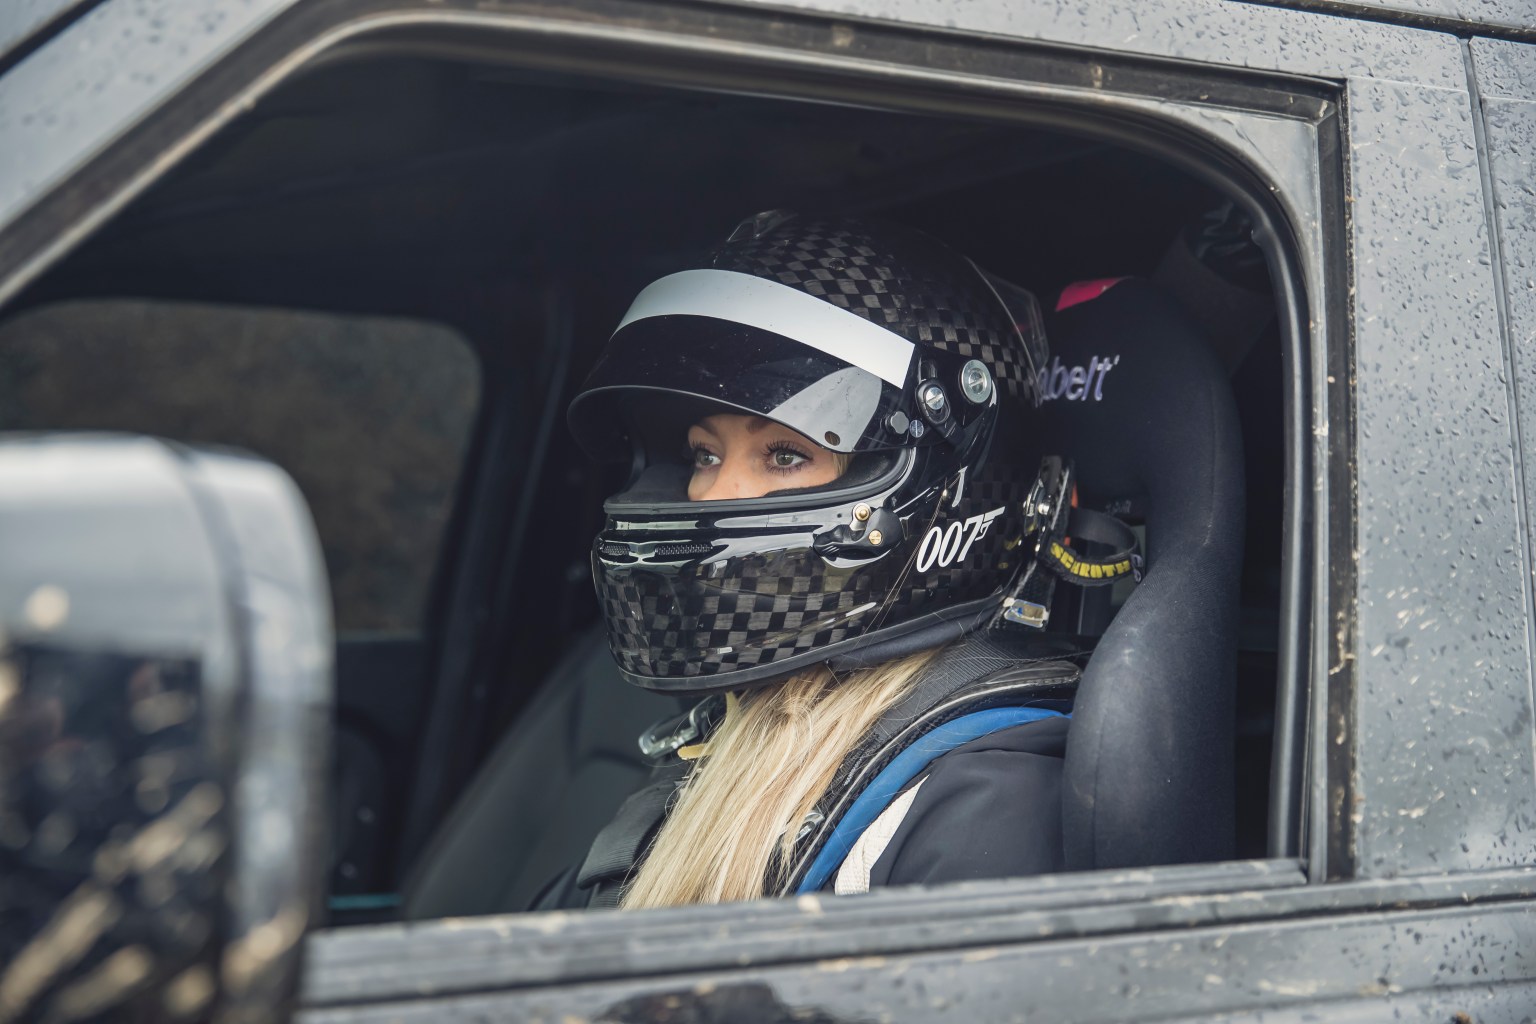 Behind-the-scenes-image-of-Stunt-Driver-Jessica-Hawkins-with-the-New-Defender-featured-in-No-Time-To-Die-_04.jpg?resize=1536,1024